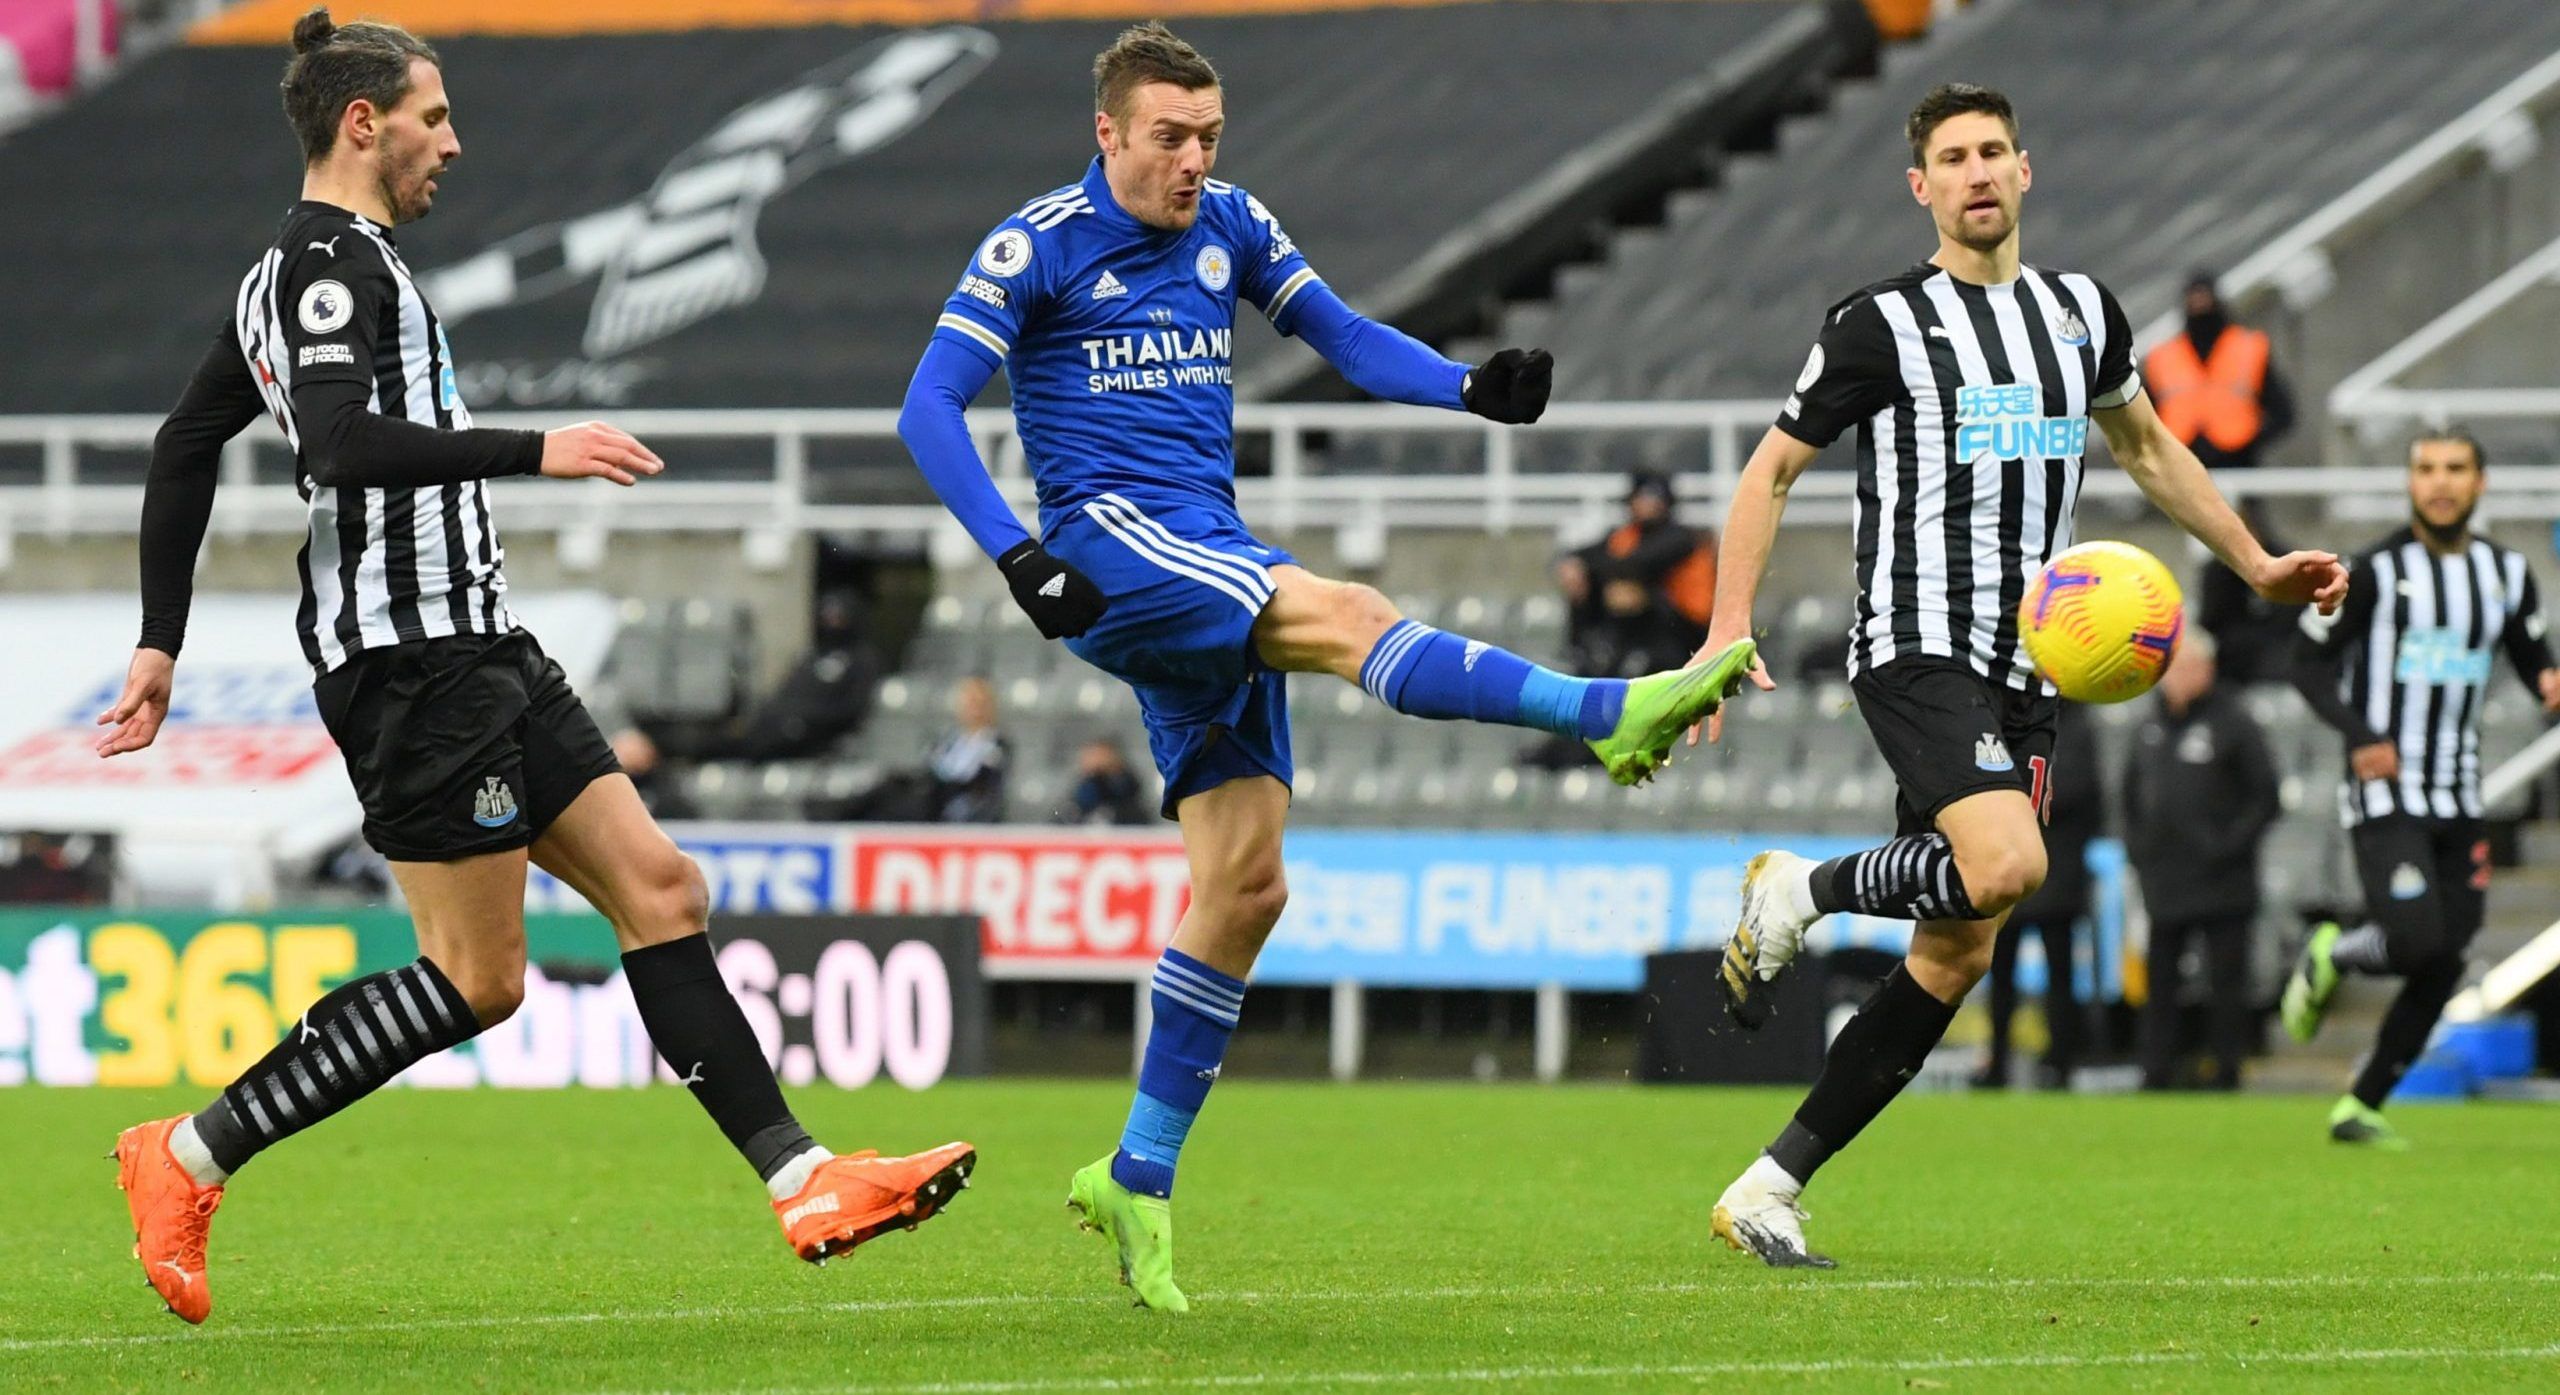 Soccer Football - Premier League - Newcastle United v Leicester City - St James' Park, Newcastle, Britain - January 3, 2021 Leicester City's Jamie Vardy scores a goal that was disallowed Pool via REUTERS/Stu Forster EDITORIAL USE ONLY. No use with unauthorized audio, video, data, fixture lists, club/league logos or 'live' services. Online in-match use limited to 75 images, no video emulation. No use in betting, games or single club /league/player publications.  Please contact your account repres